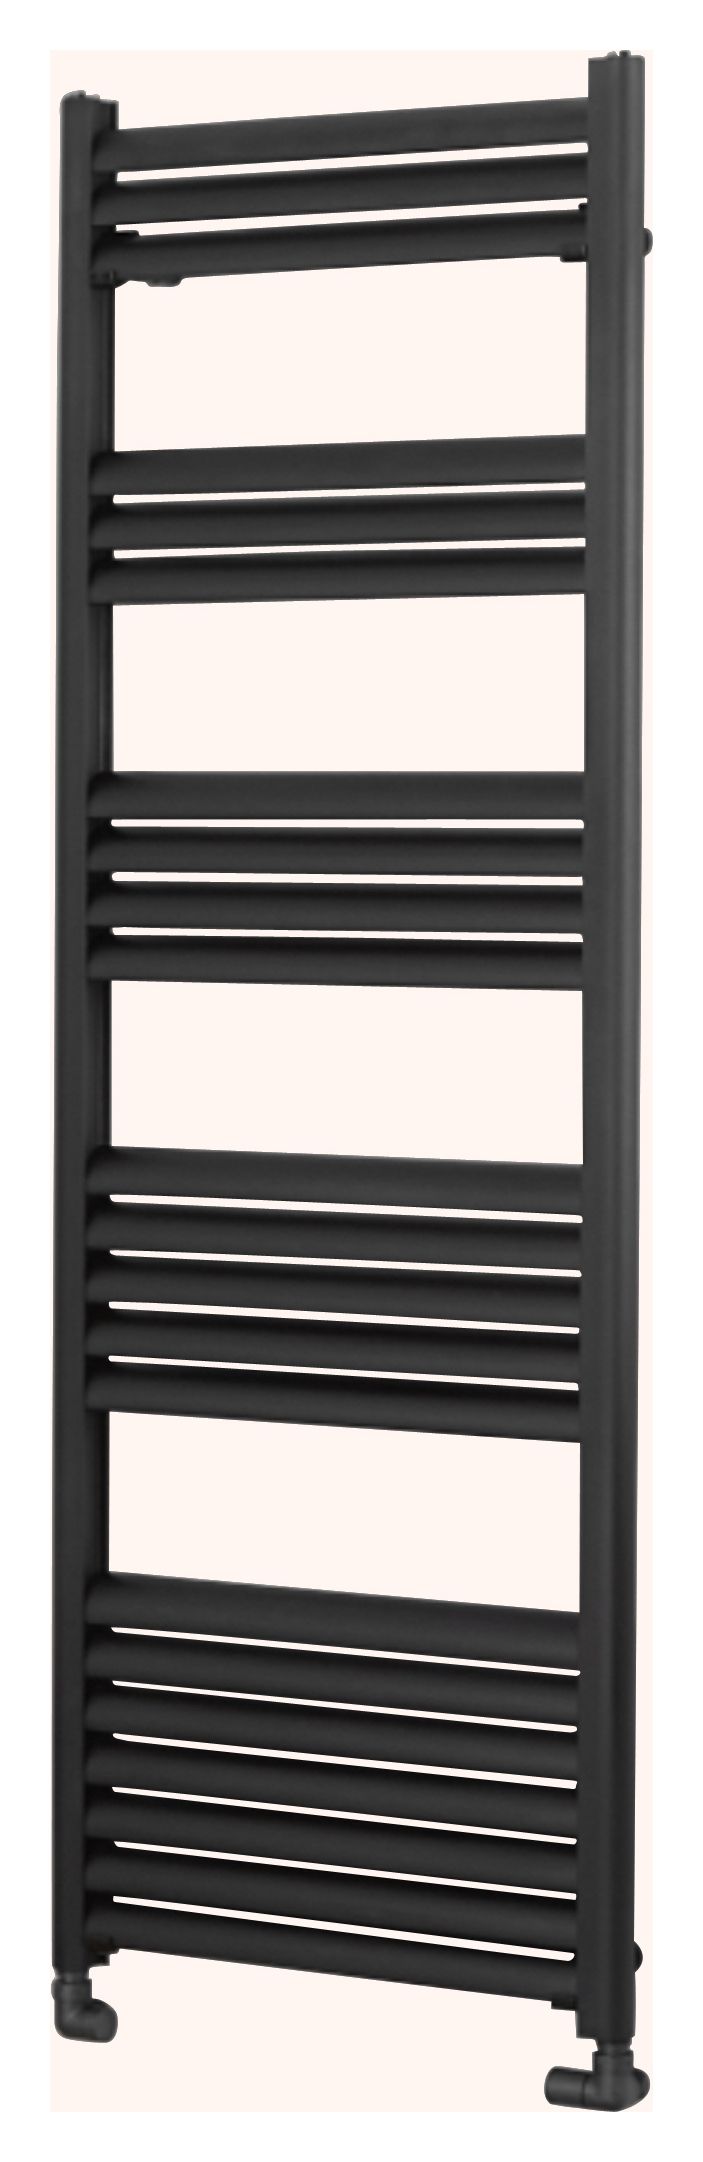 Towelrads Eton Anthracite Radiator - 1200mm - Various Widths Available